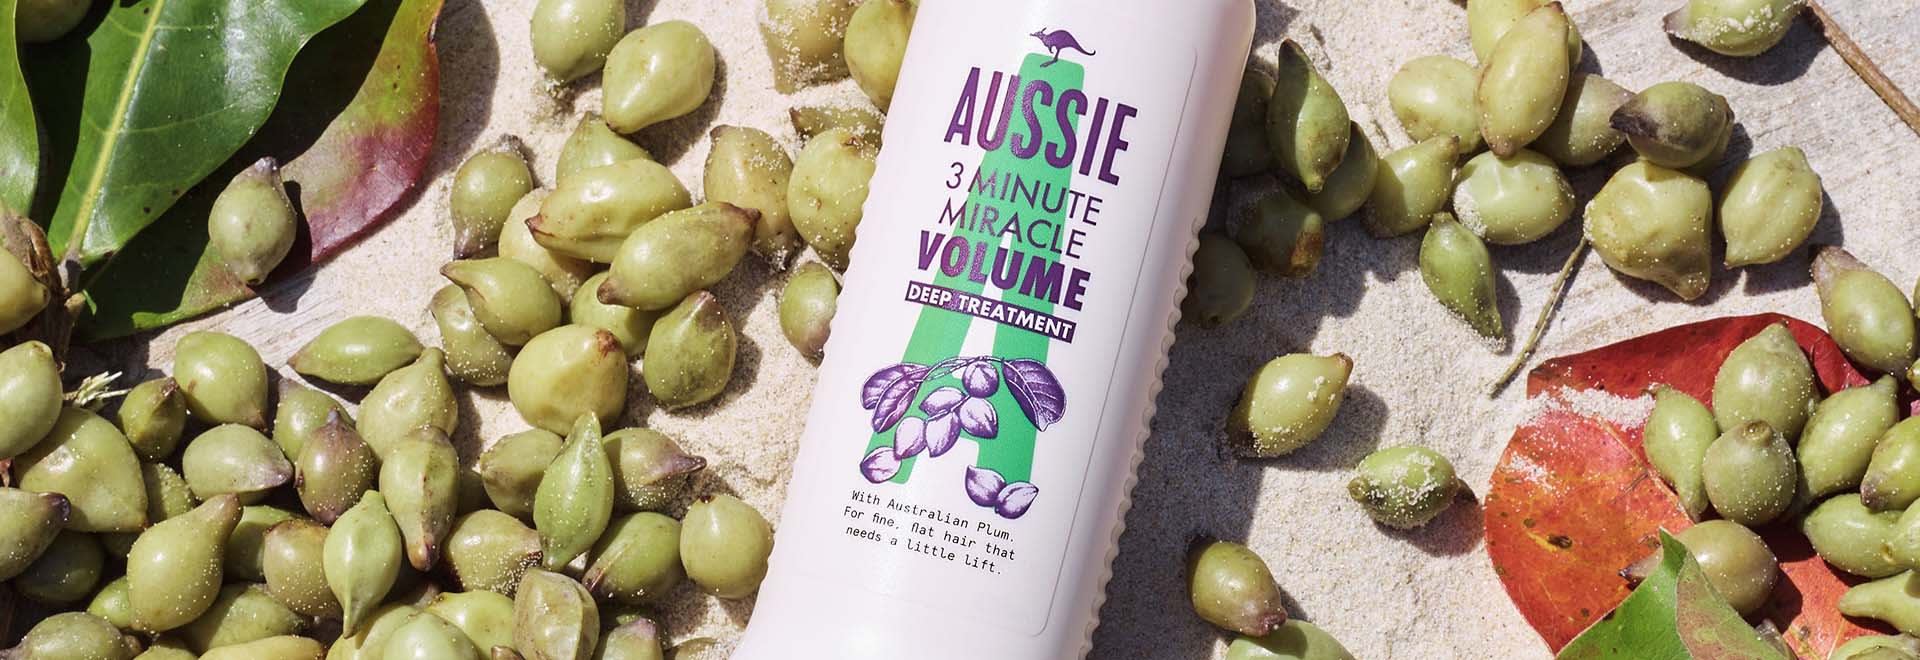 An Aussie bottle surrounded by kakadu plums on the sand 